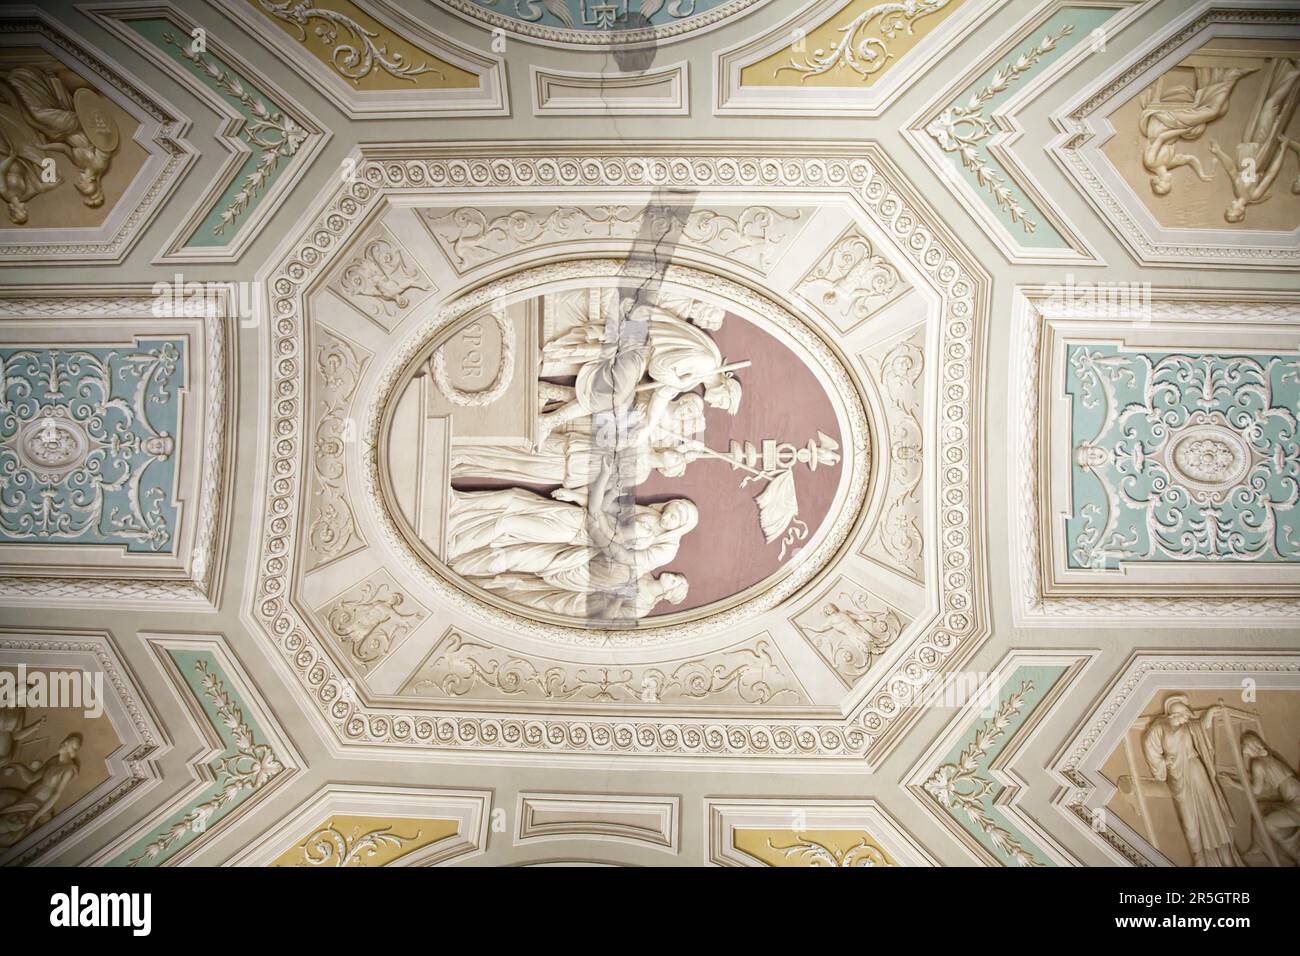 Vatican Museums, Rome, Italy: example of painting restoration technique Stock Photo